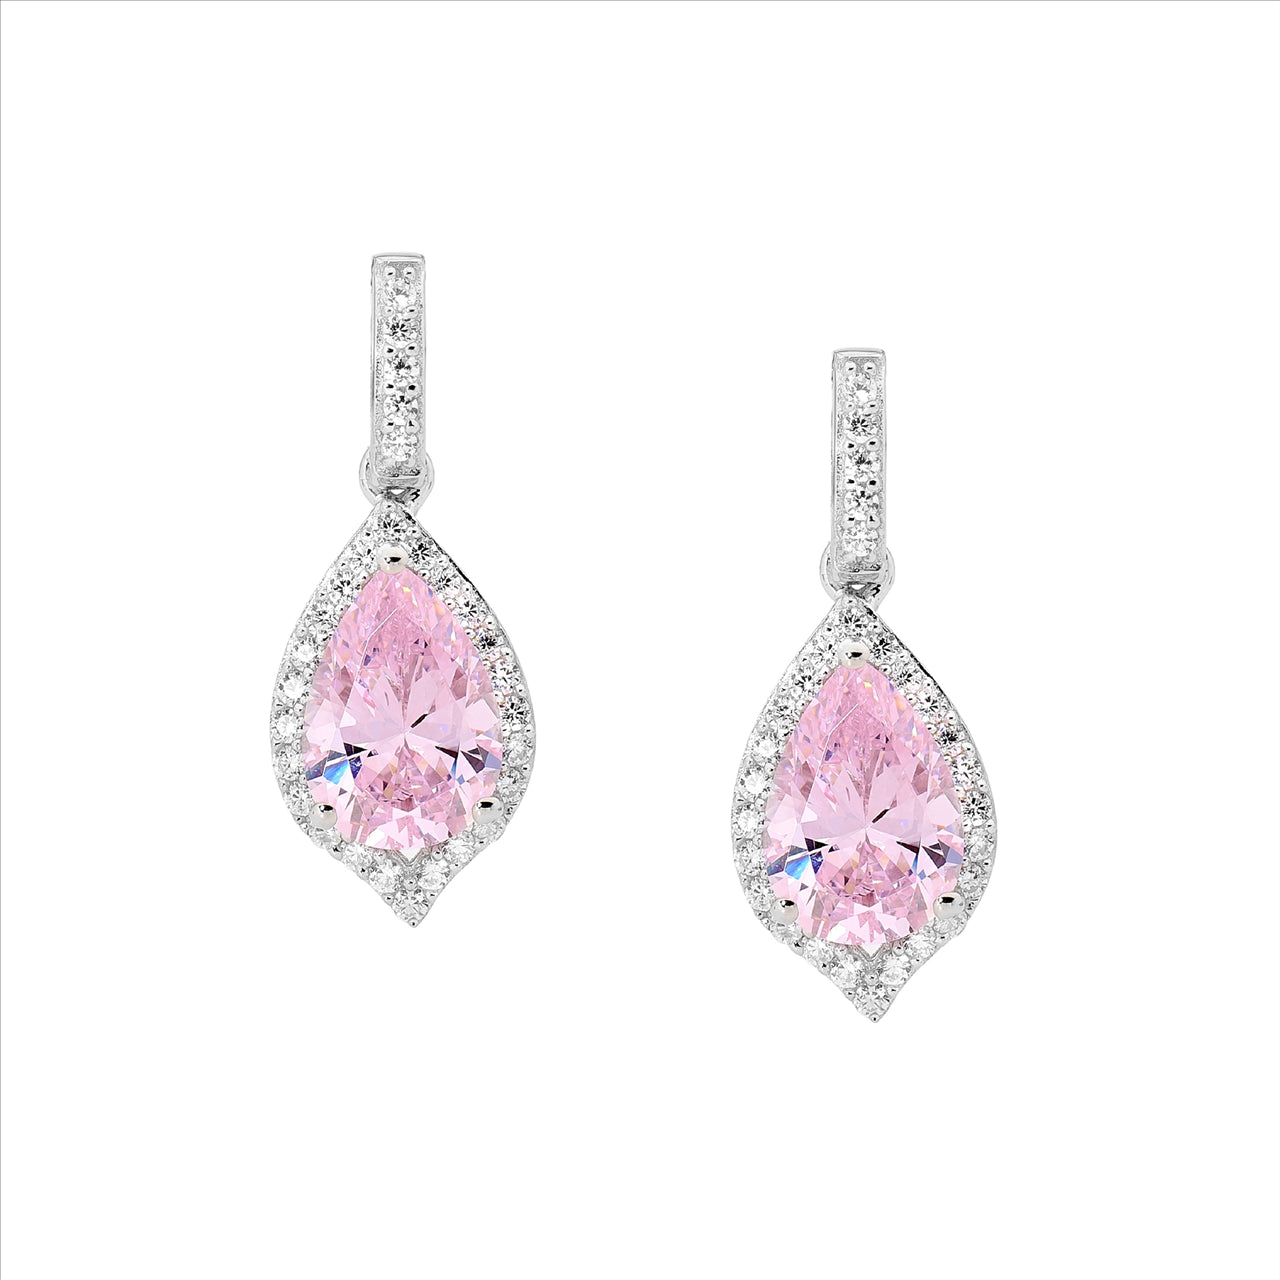 Ellani pink pear shaped cubic zirconia with cubic zirconia surround drop earrings in sterling silver